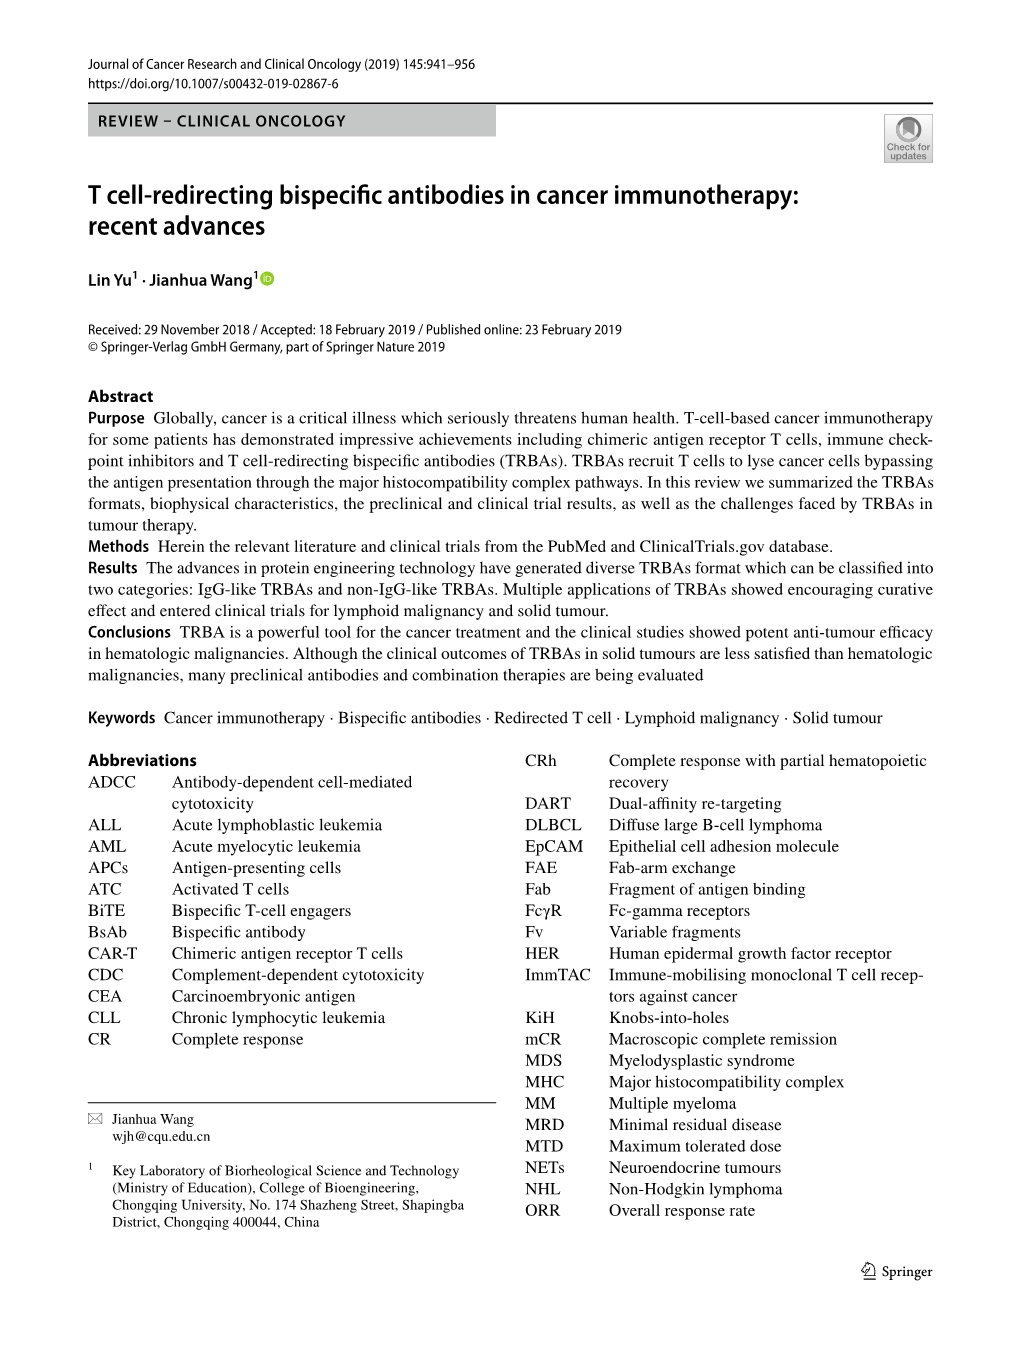 T Cell-Redirecting Bispecific Antibodies in Cancer Immunotherapy: Recent Advances